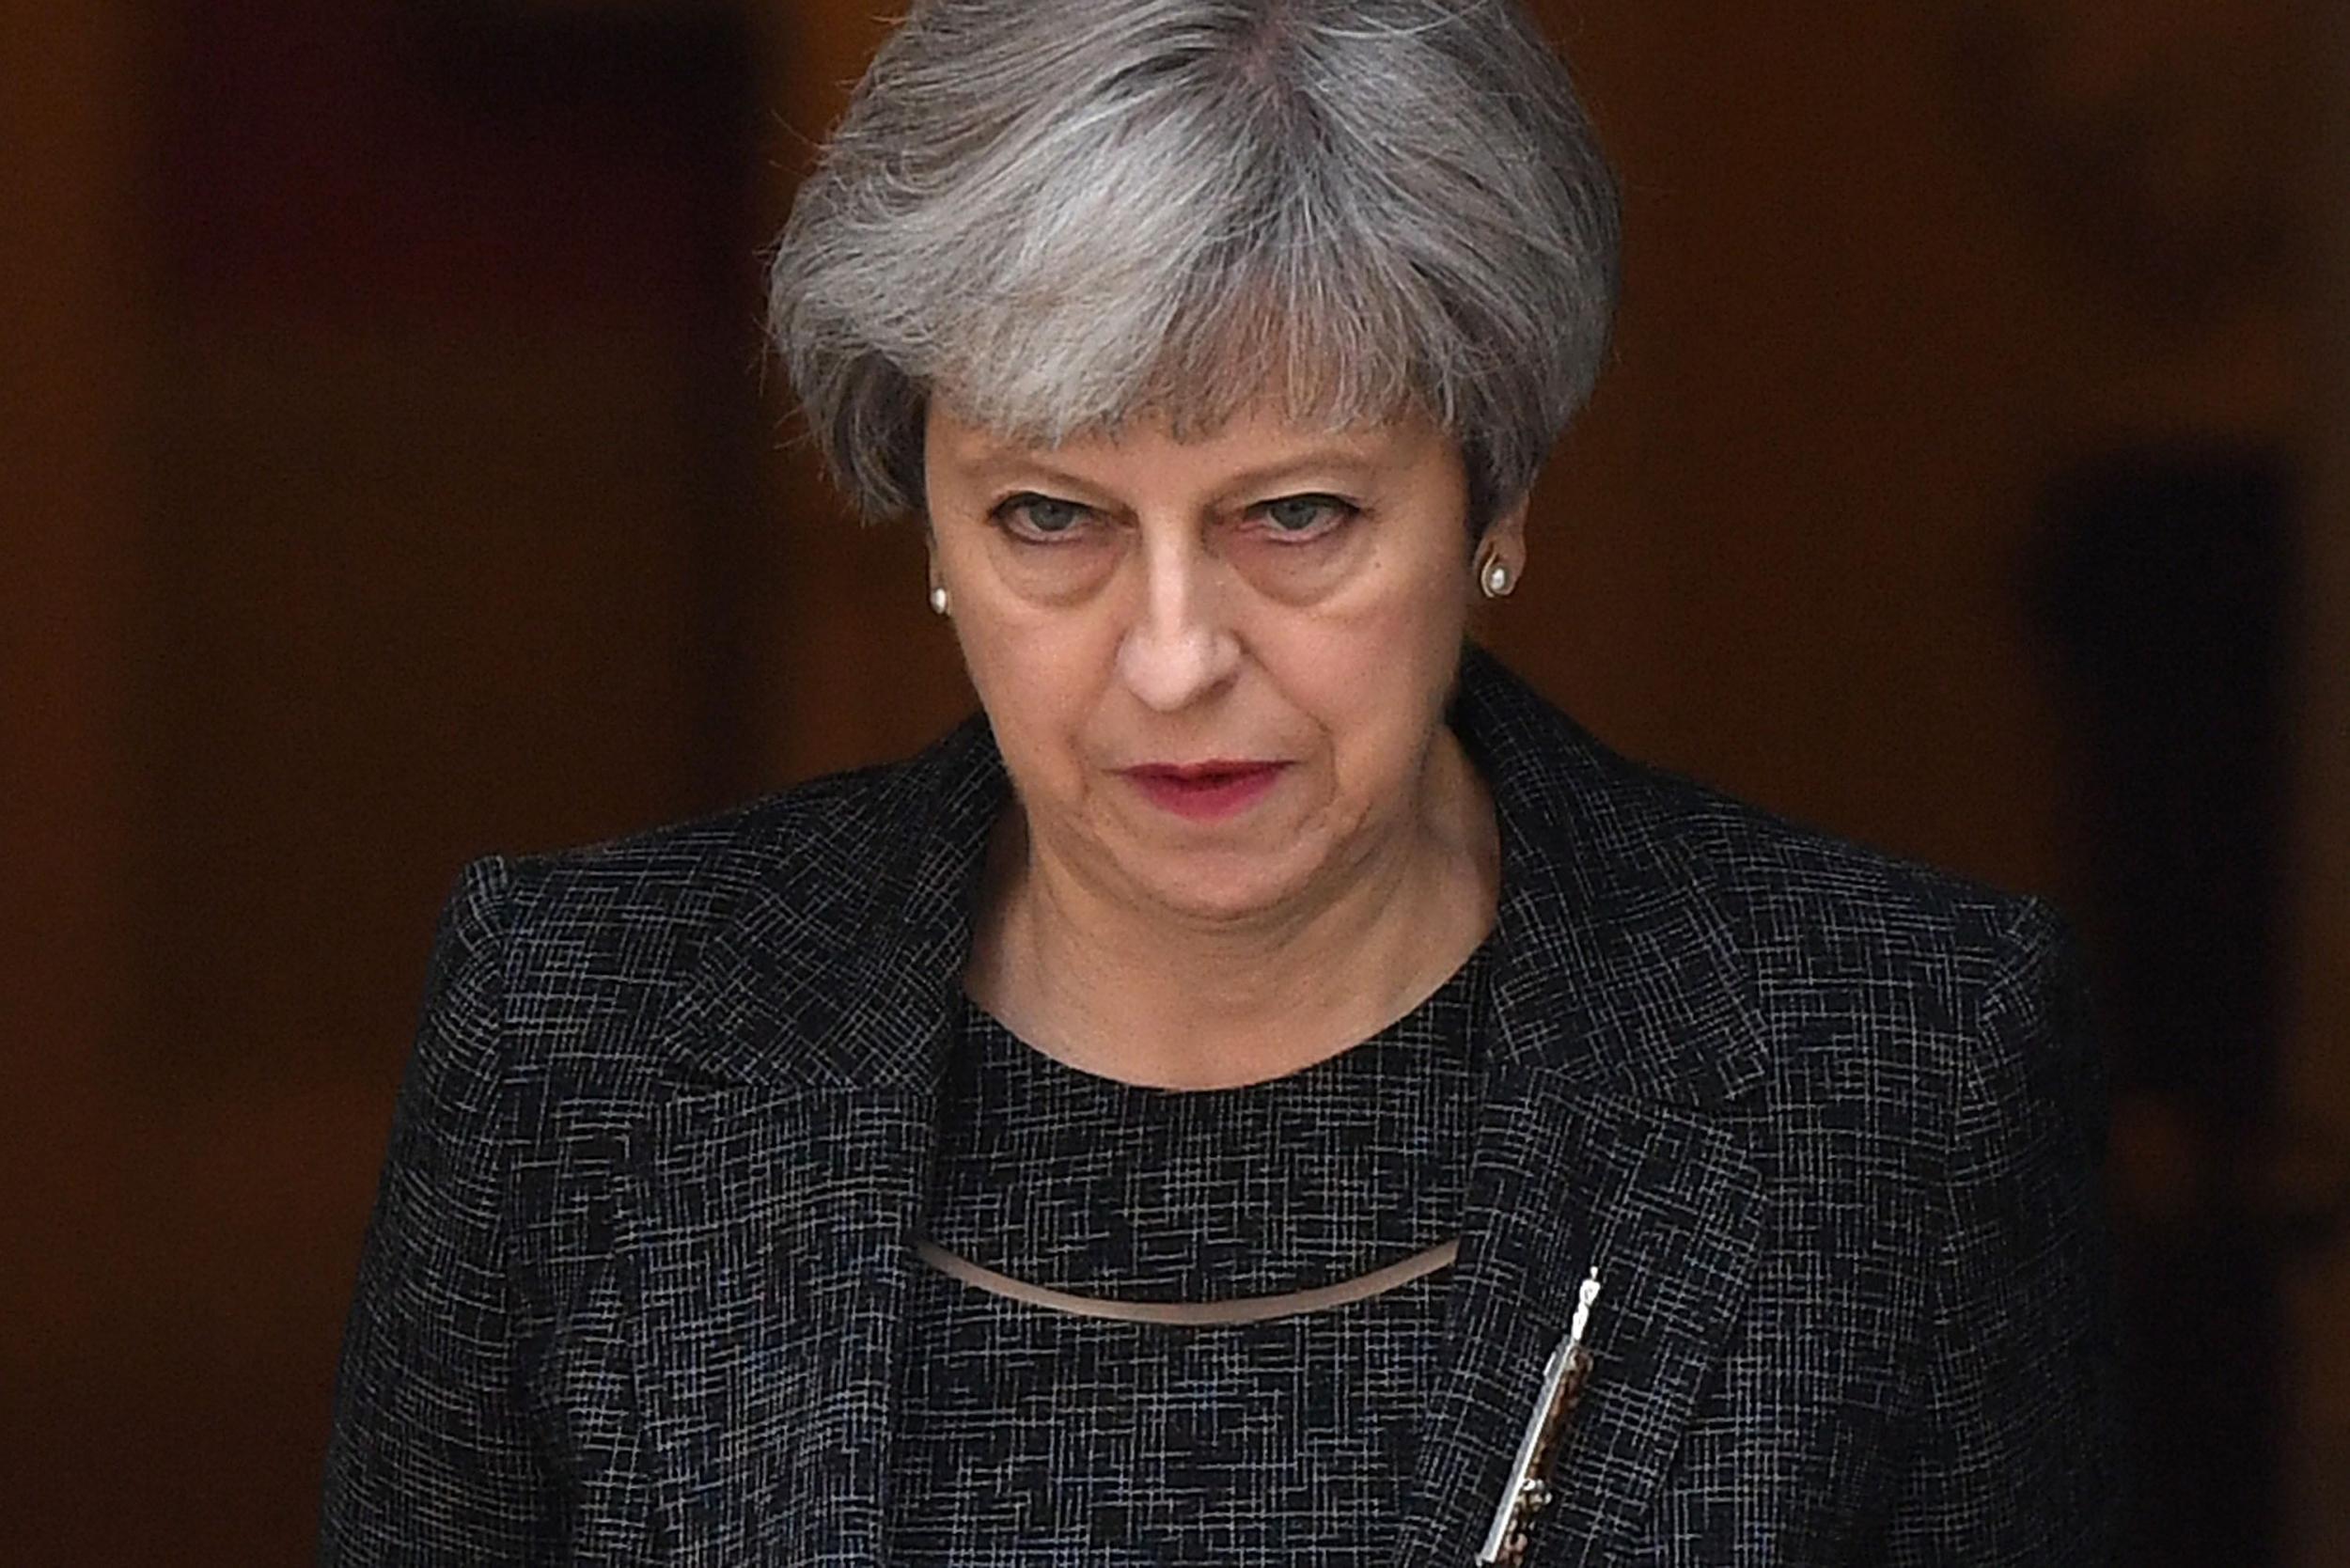 Theresa May is struggling to maintain her authority after shock election result